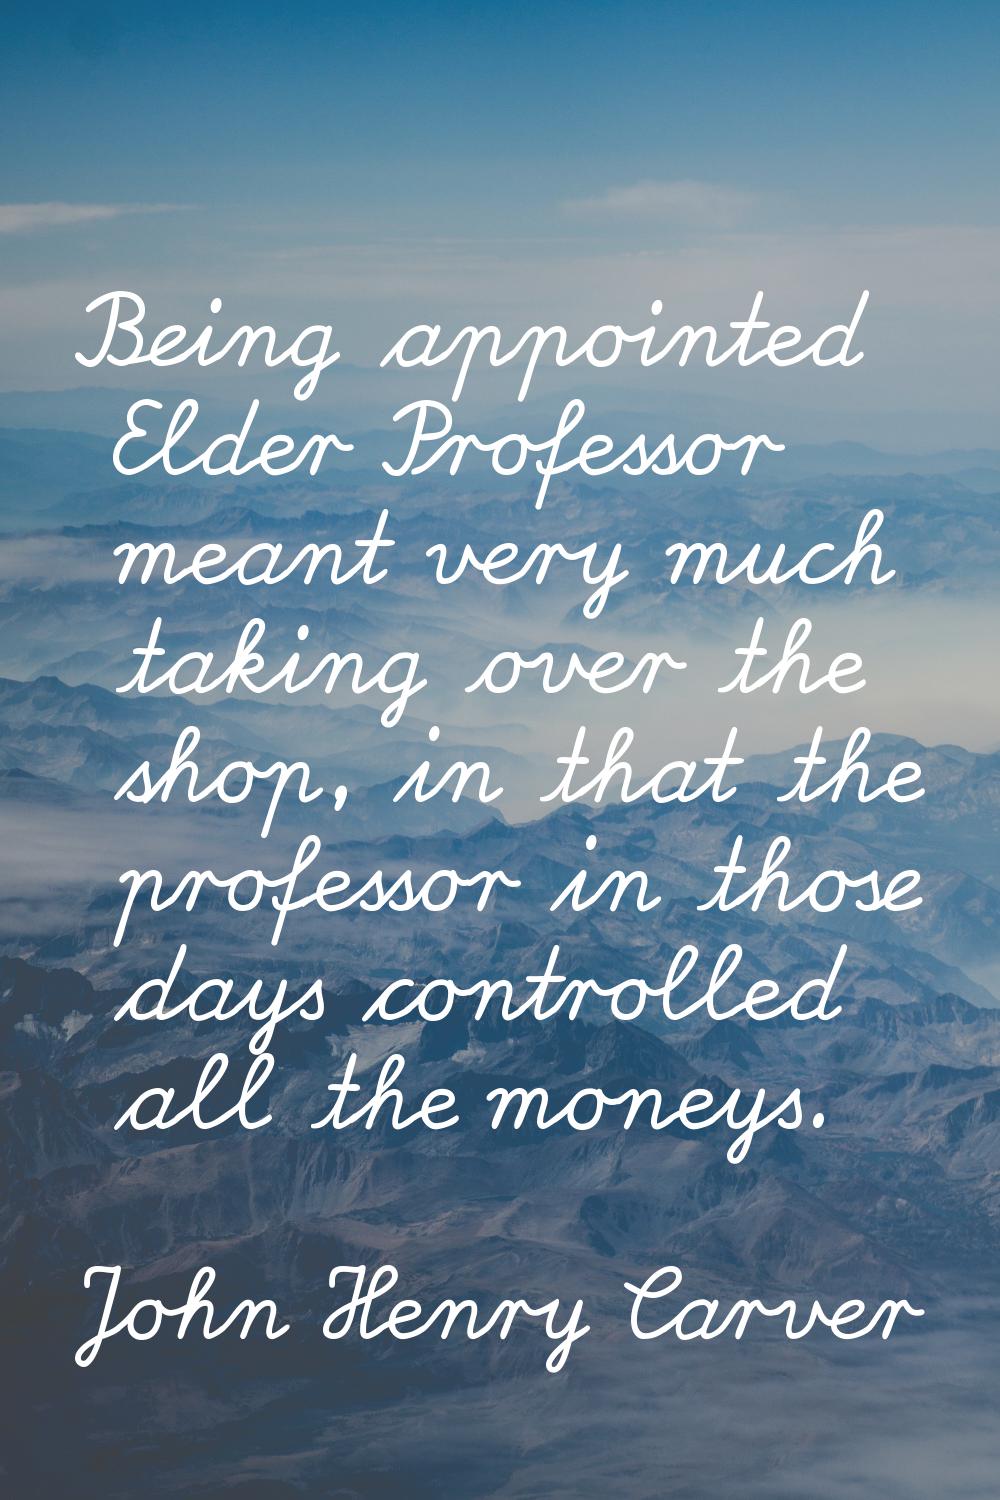 Being appointed Elder Professor meant very much taking over the shop, in that the professor in thos